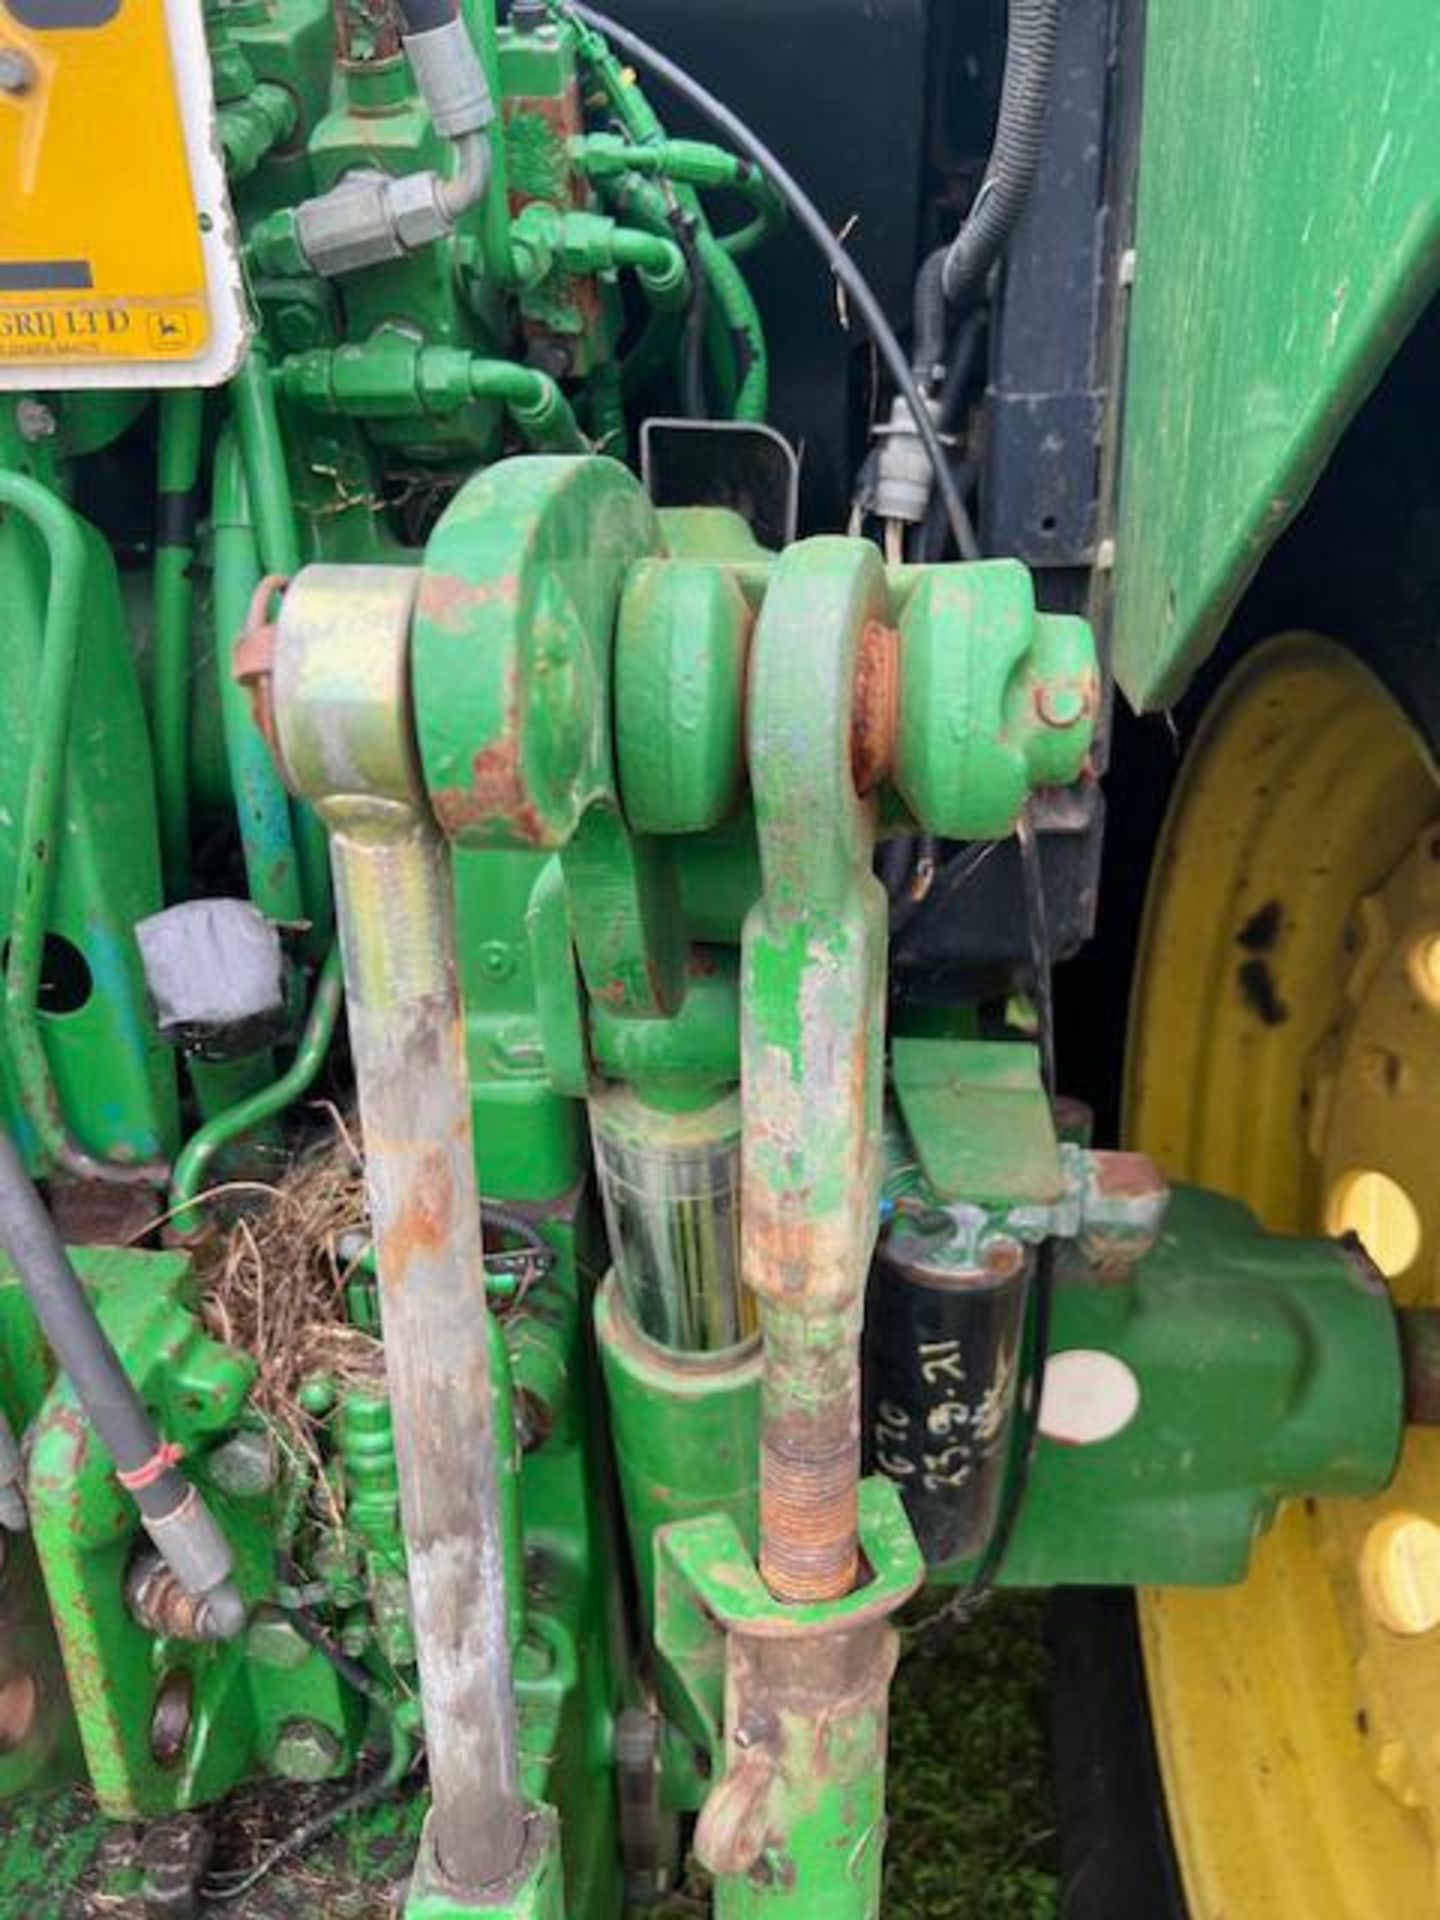 2000 JOHN DEERE 7810 TRACTOR - AIR CON - 10600 HOURS - Image 6 of 19